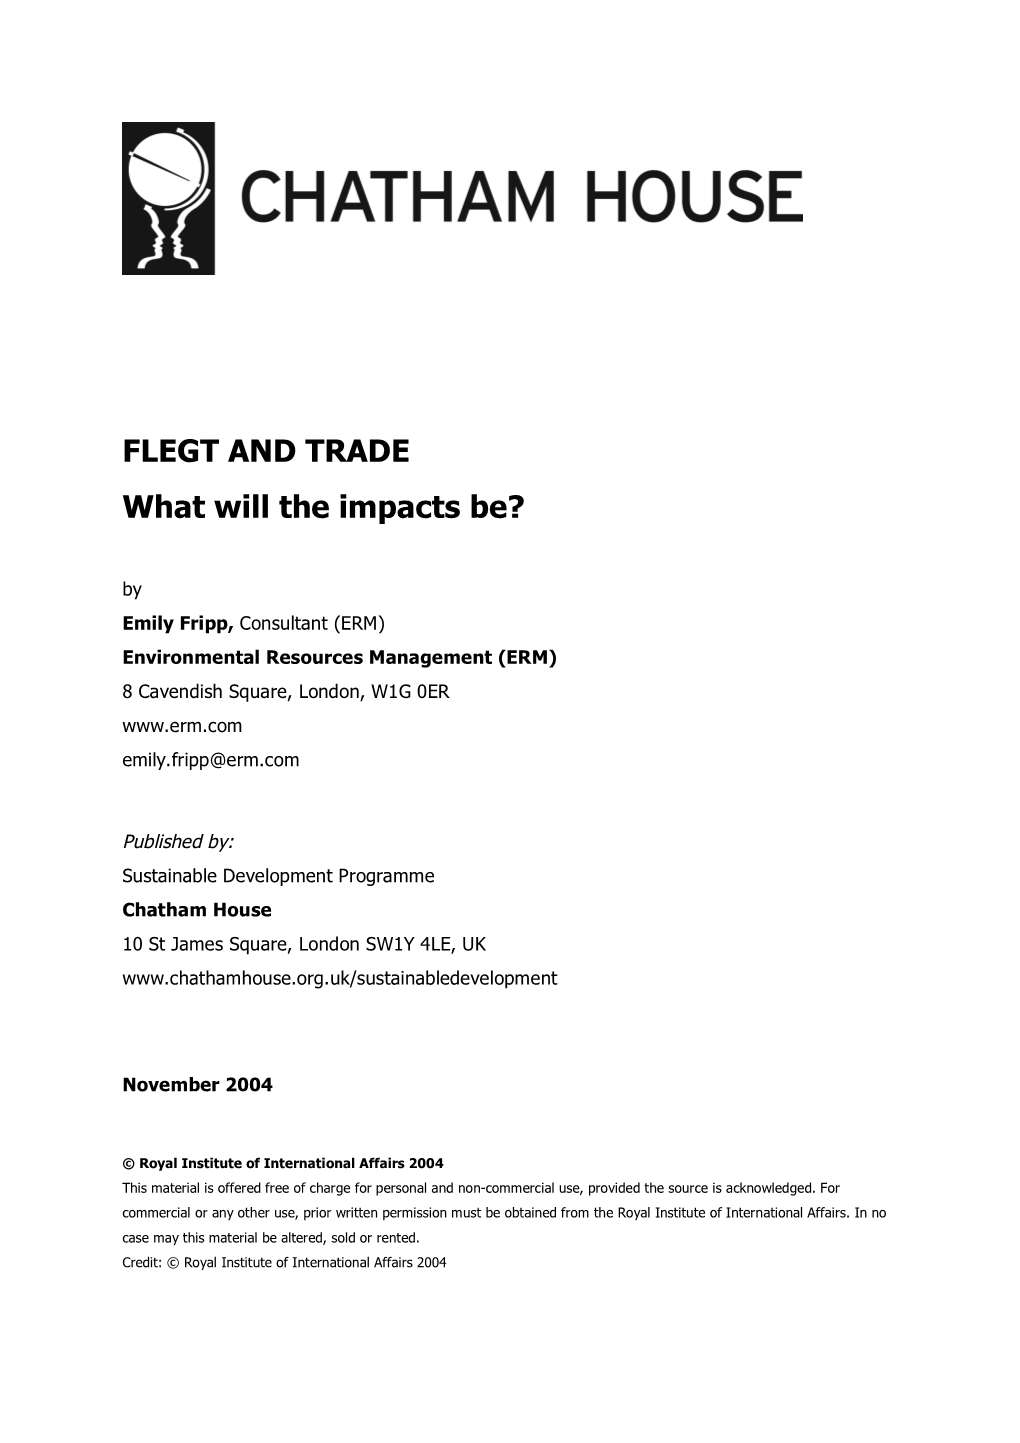 FLEGT and TRADE What Will the Impacts Be?